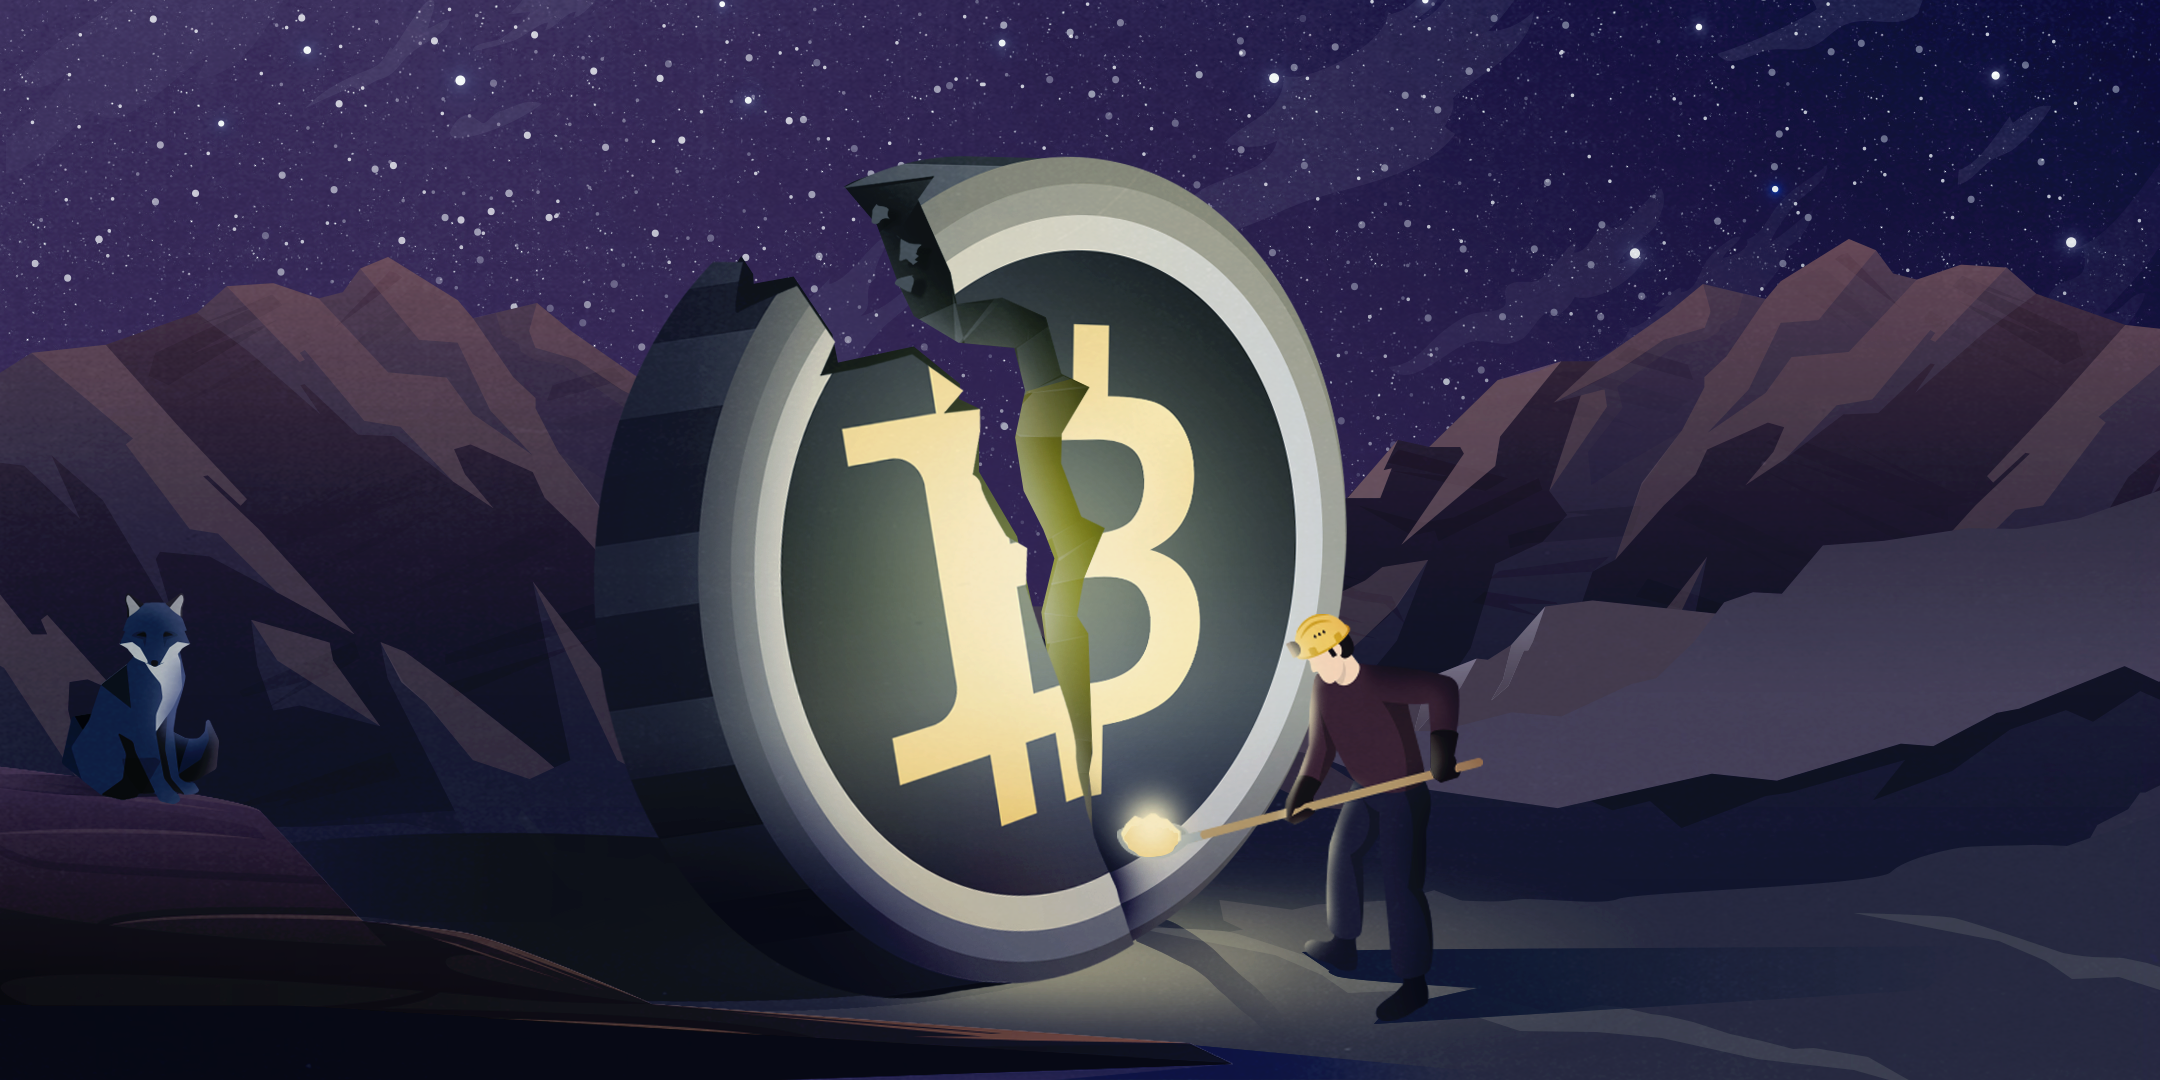 An illustration of a man in a miner's hat and overalls using a pickaxe to break into a giant Bitcoin.